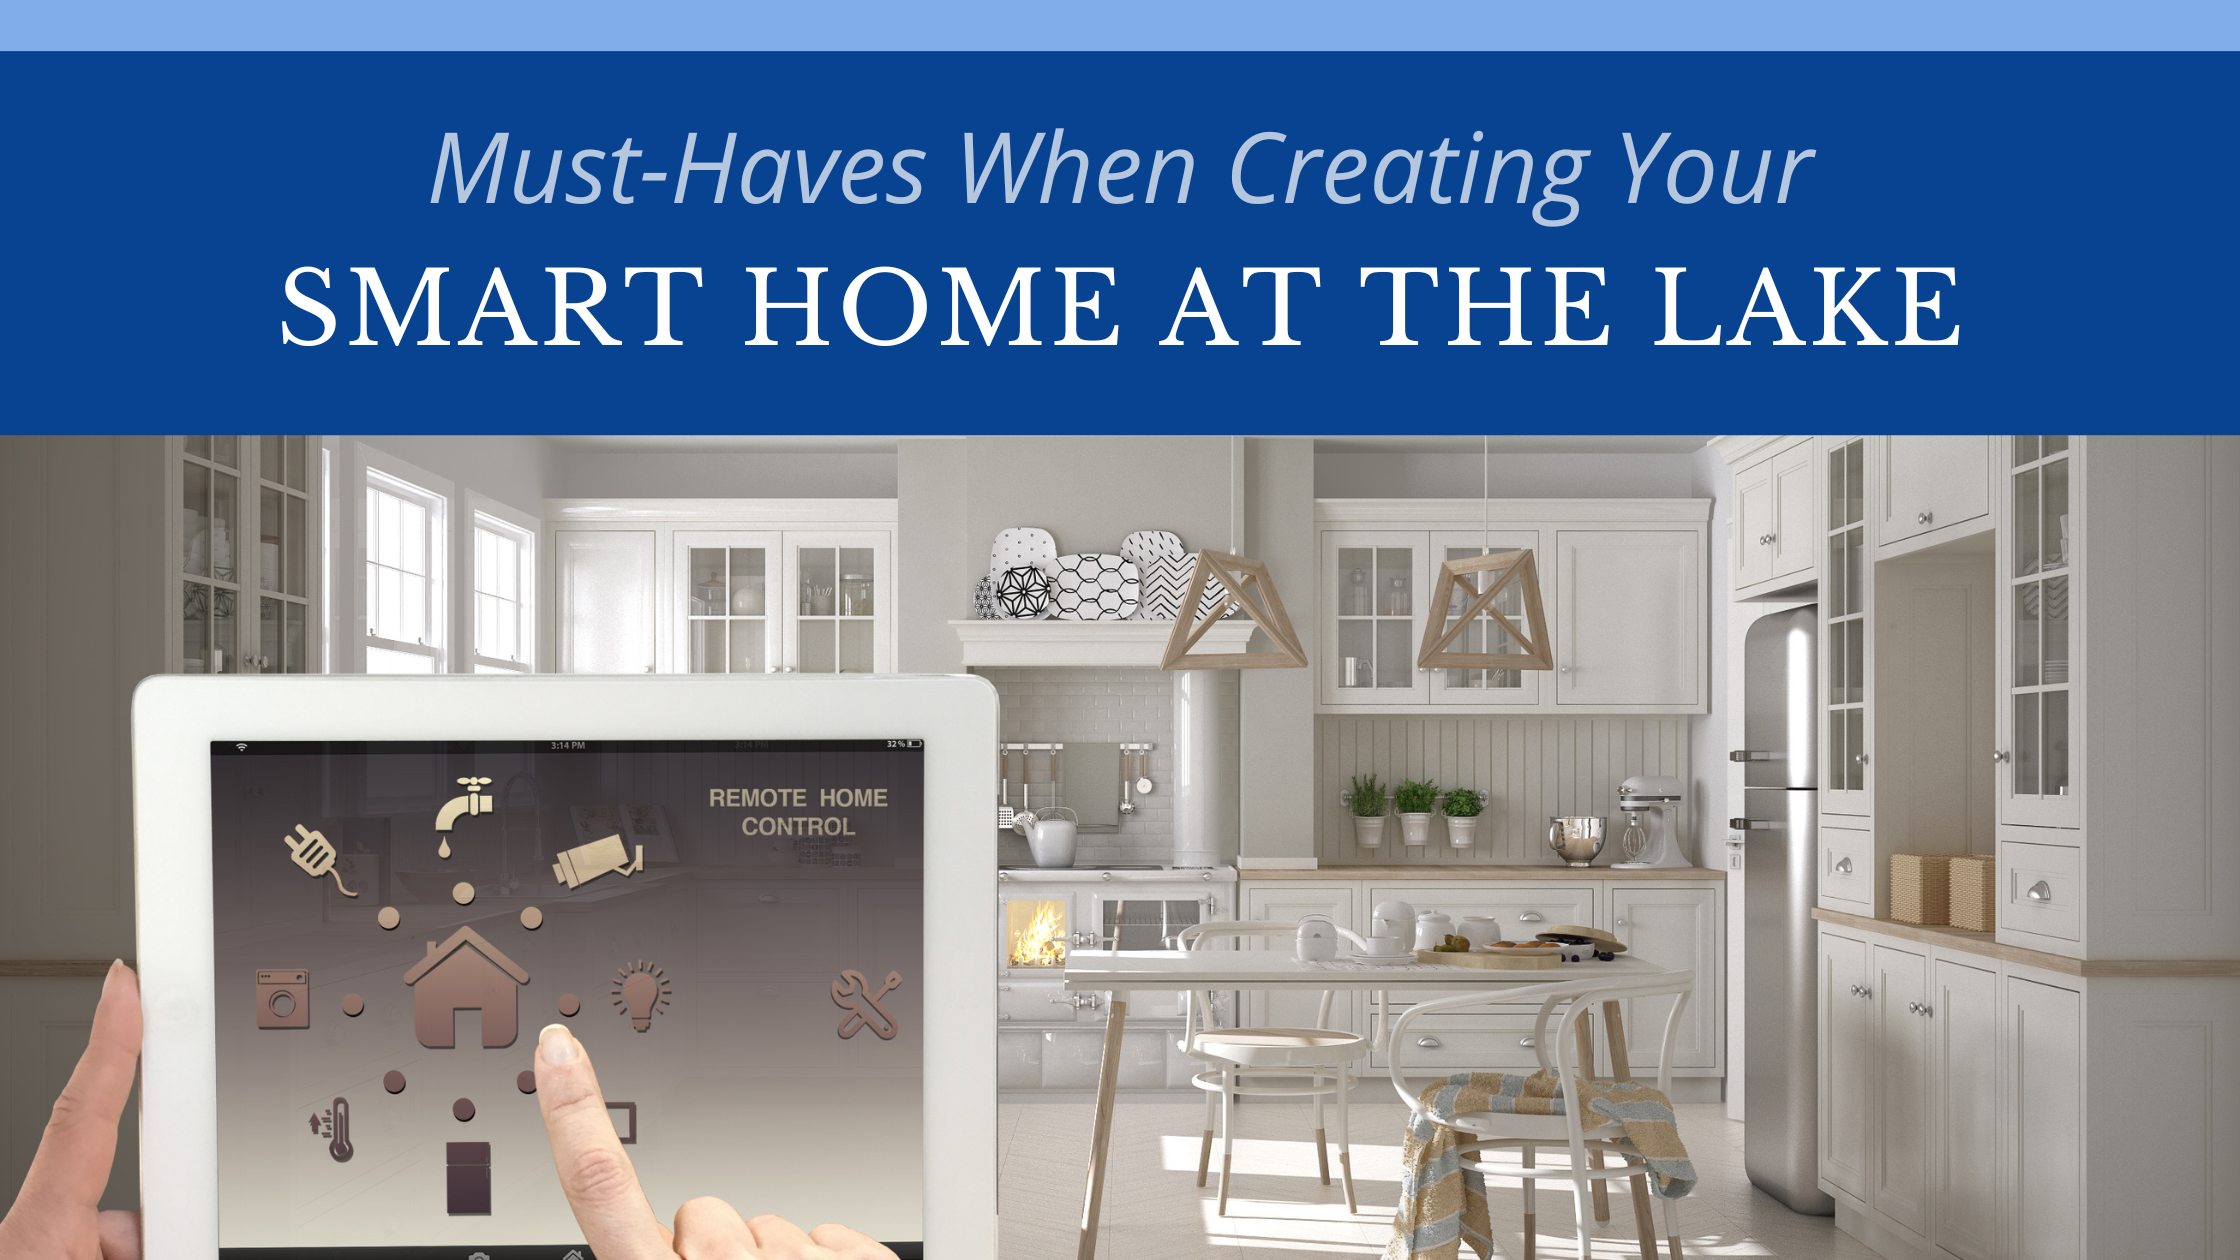 Must-Haves When Creating Your Smart Home on the Lake